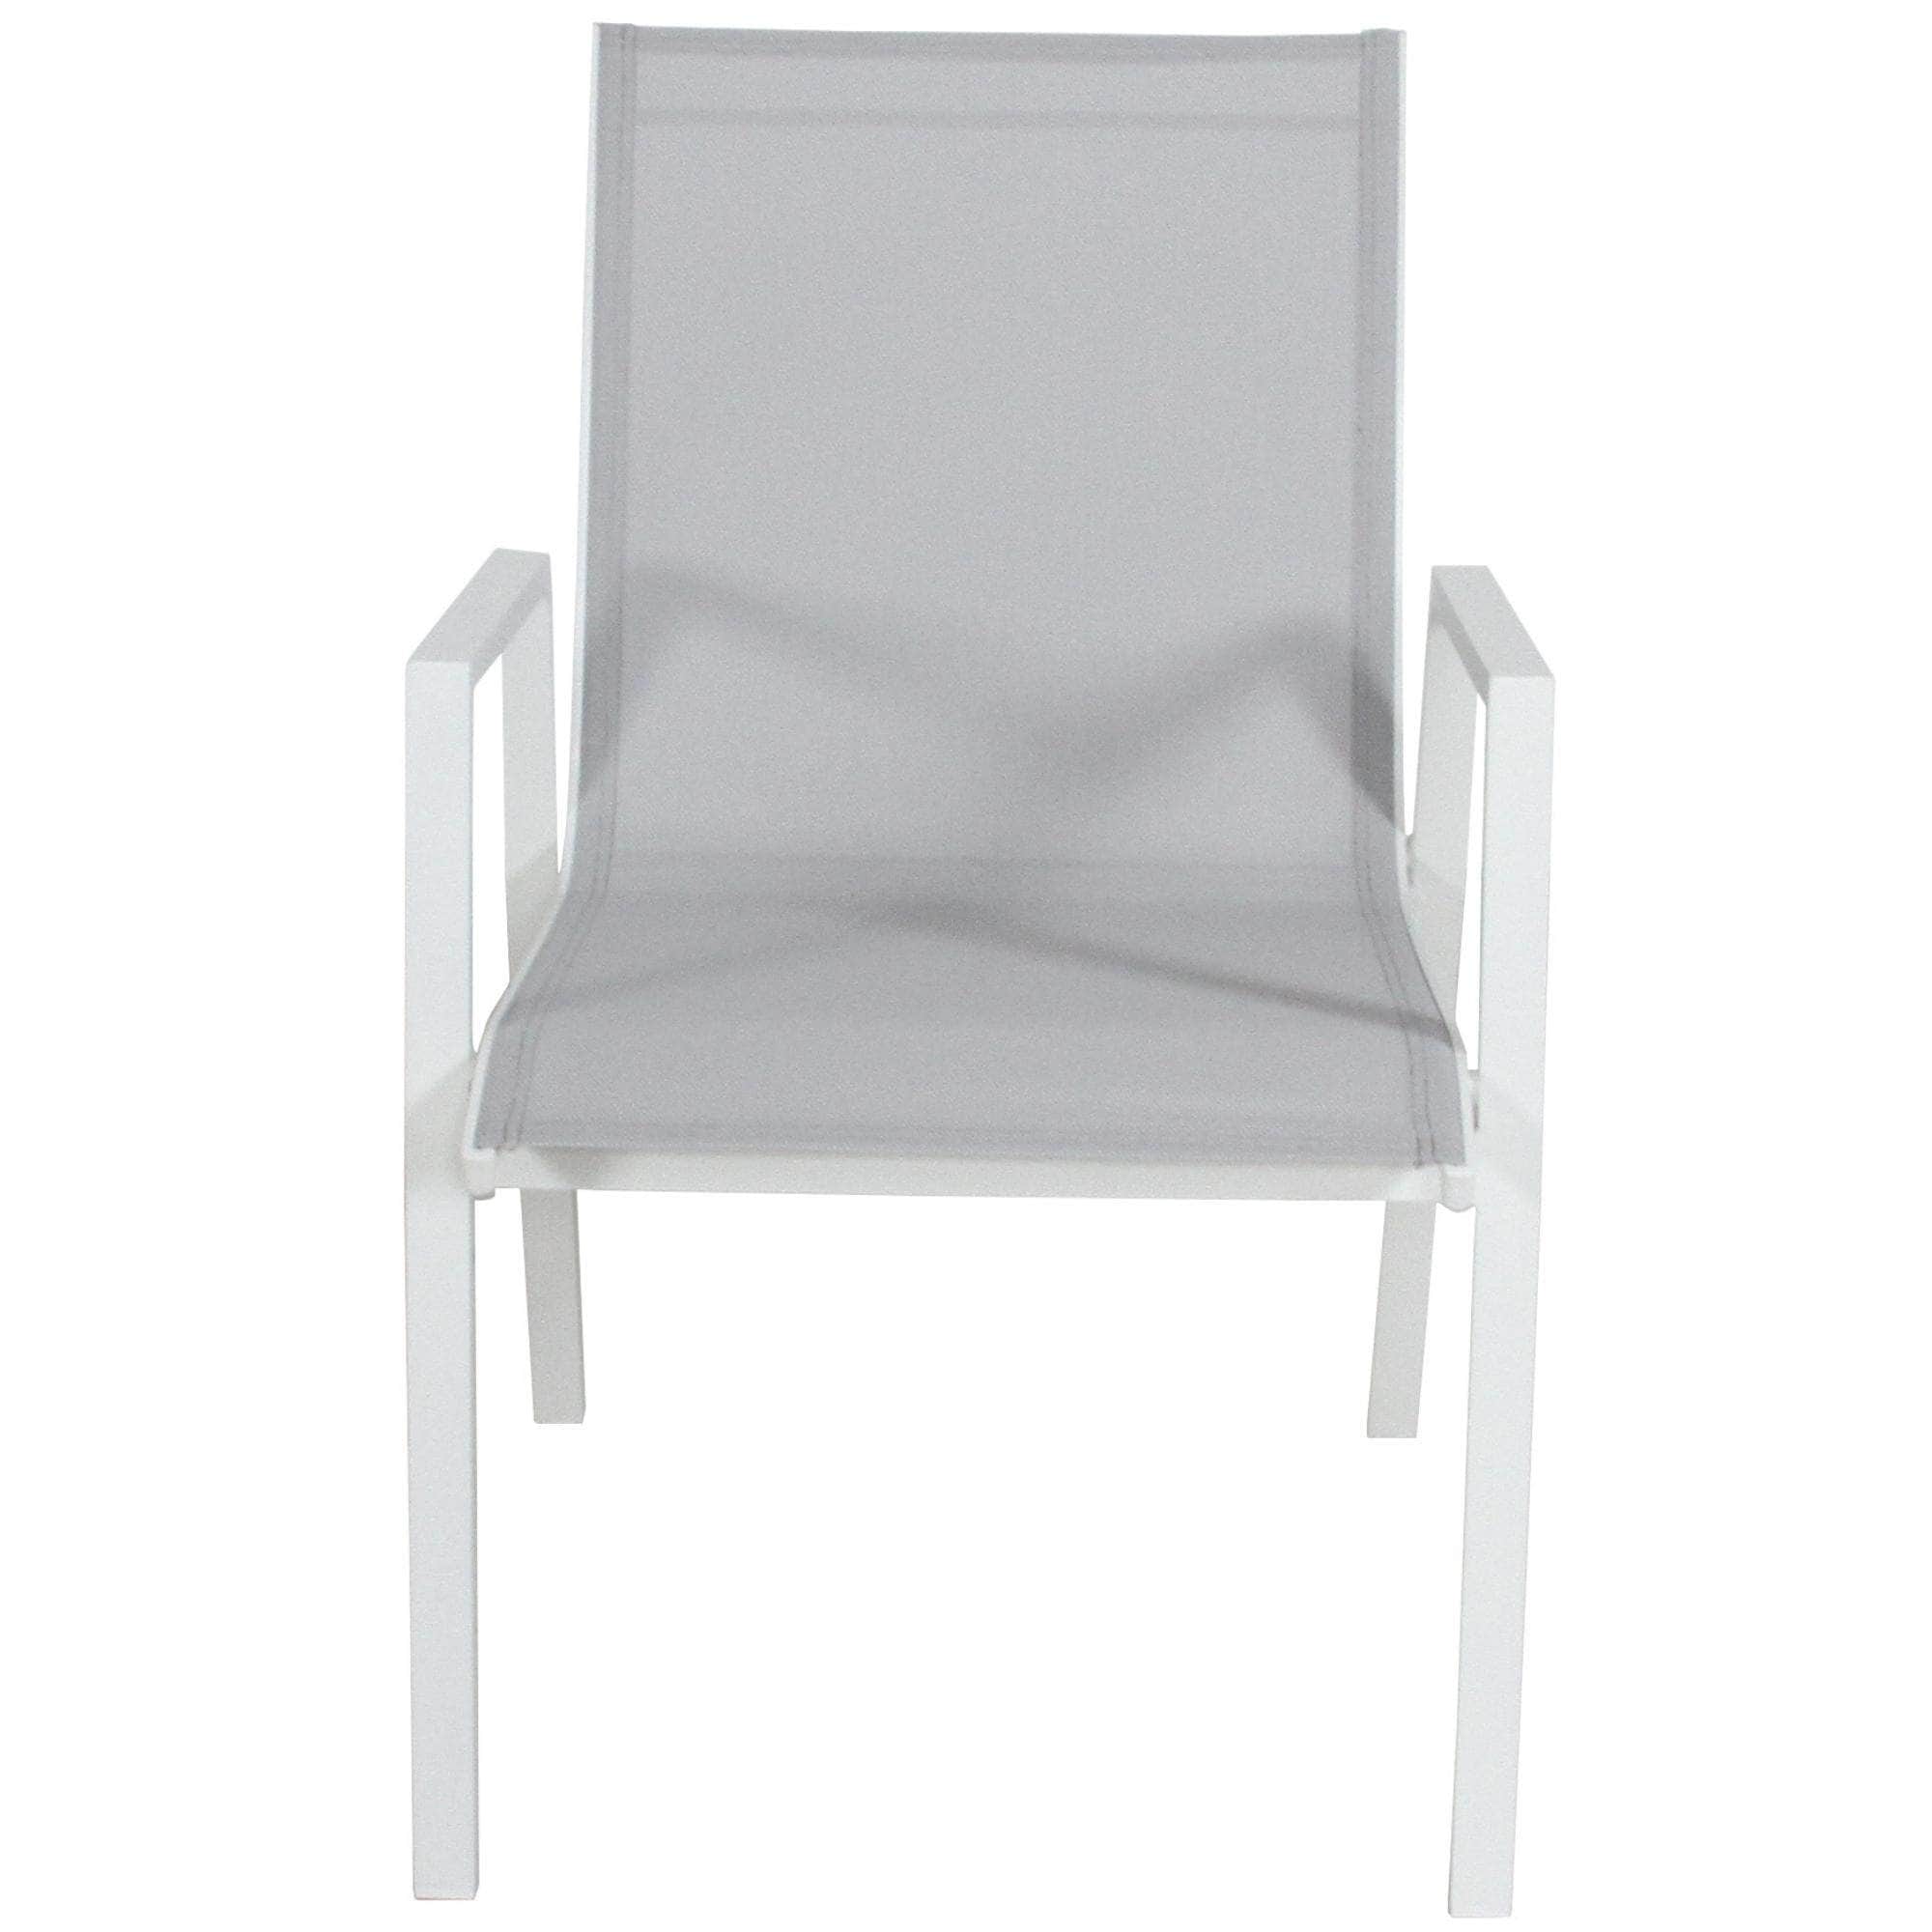 2Pc Set Aluminium Outdoor Dining Table Chair White